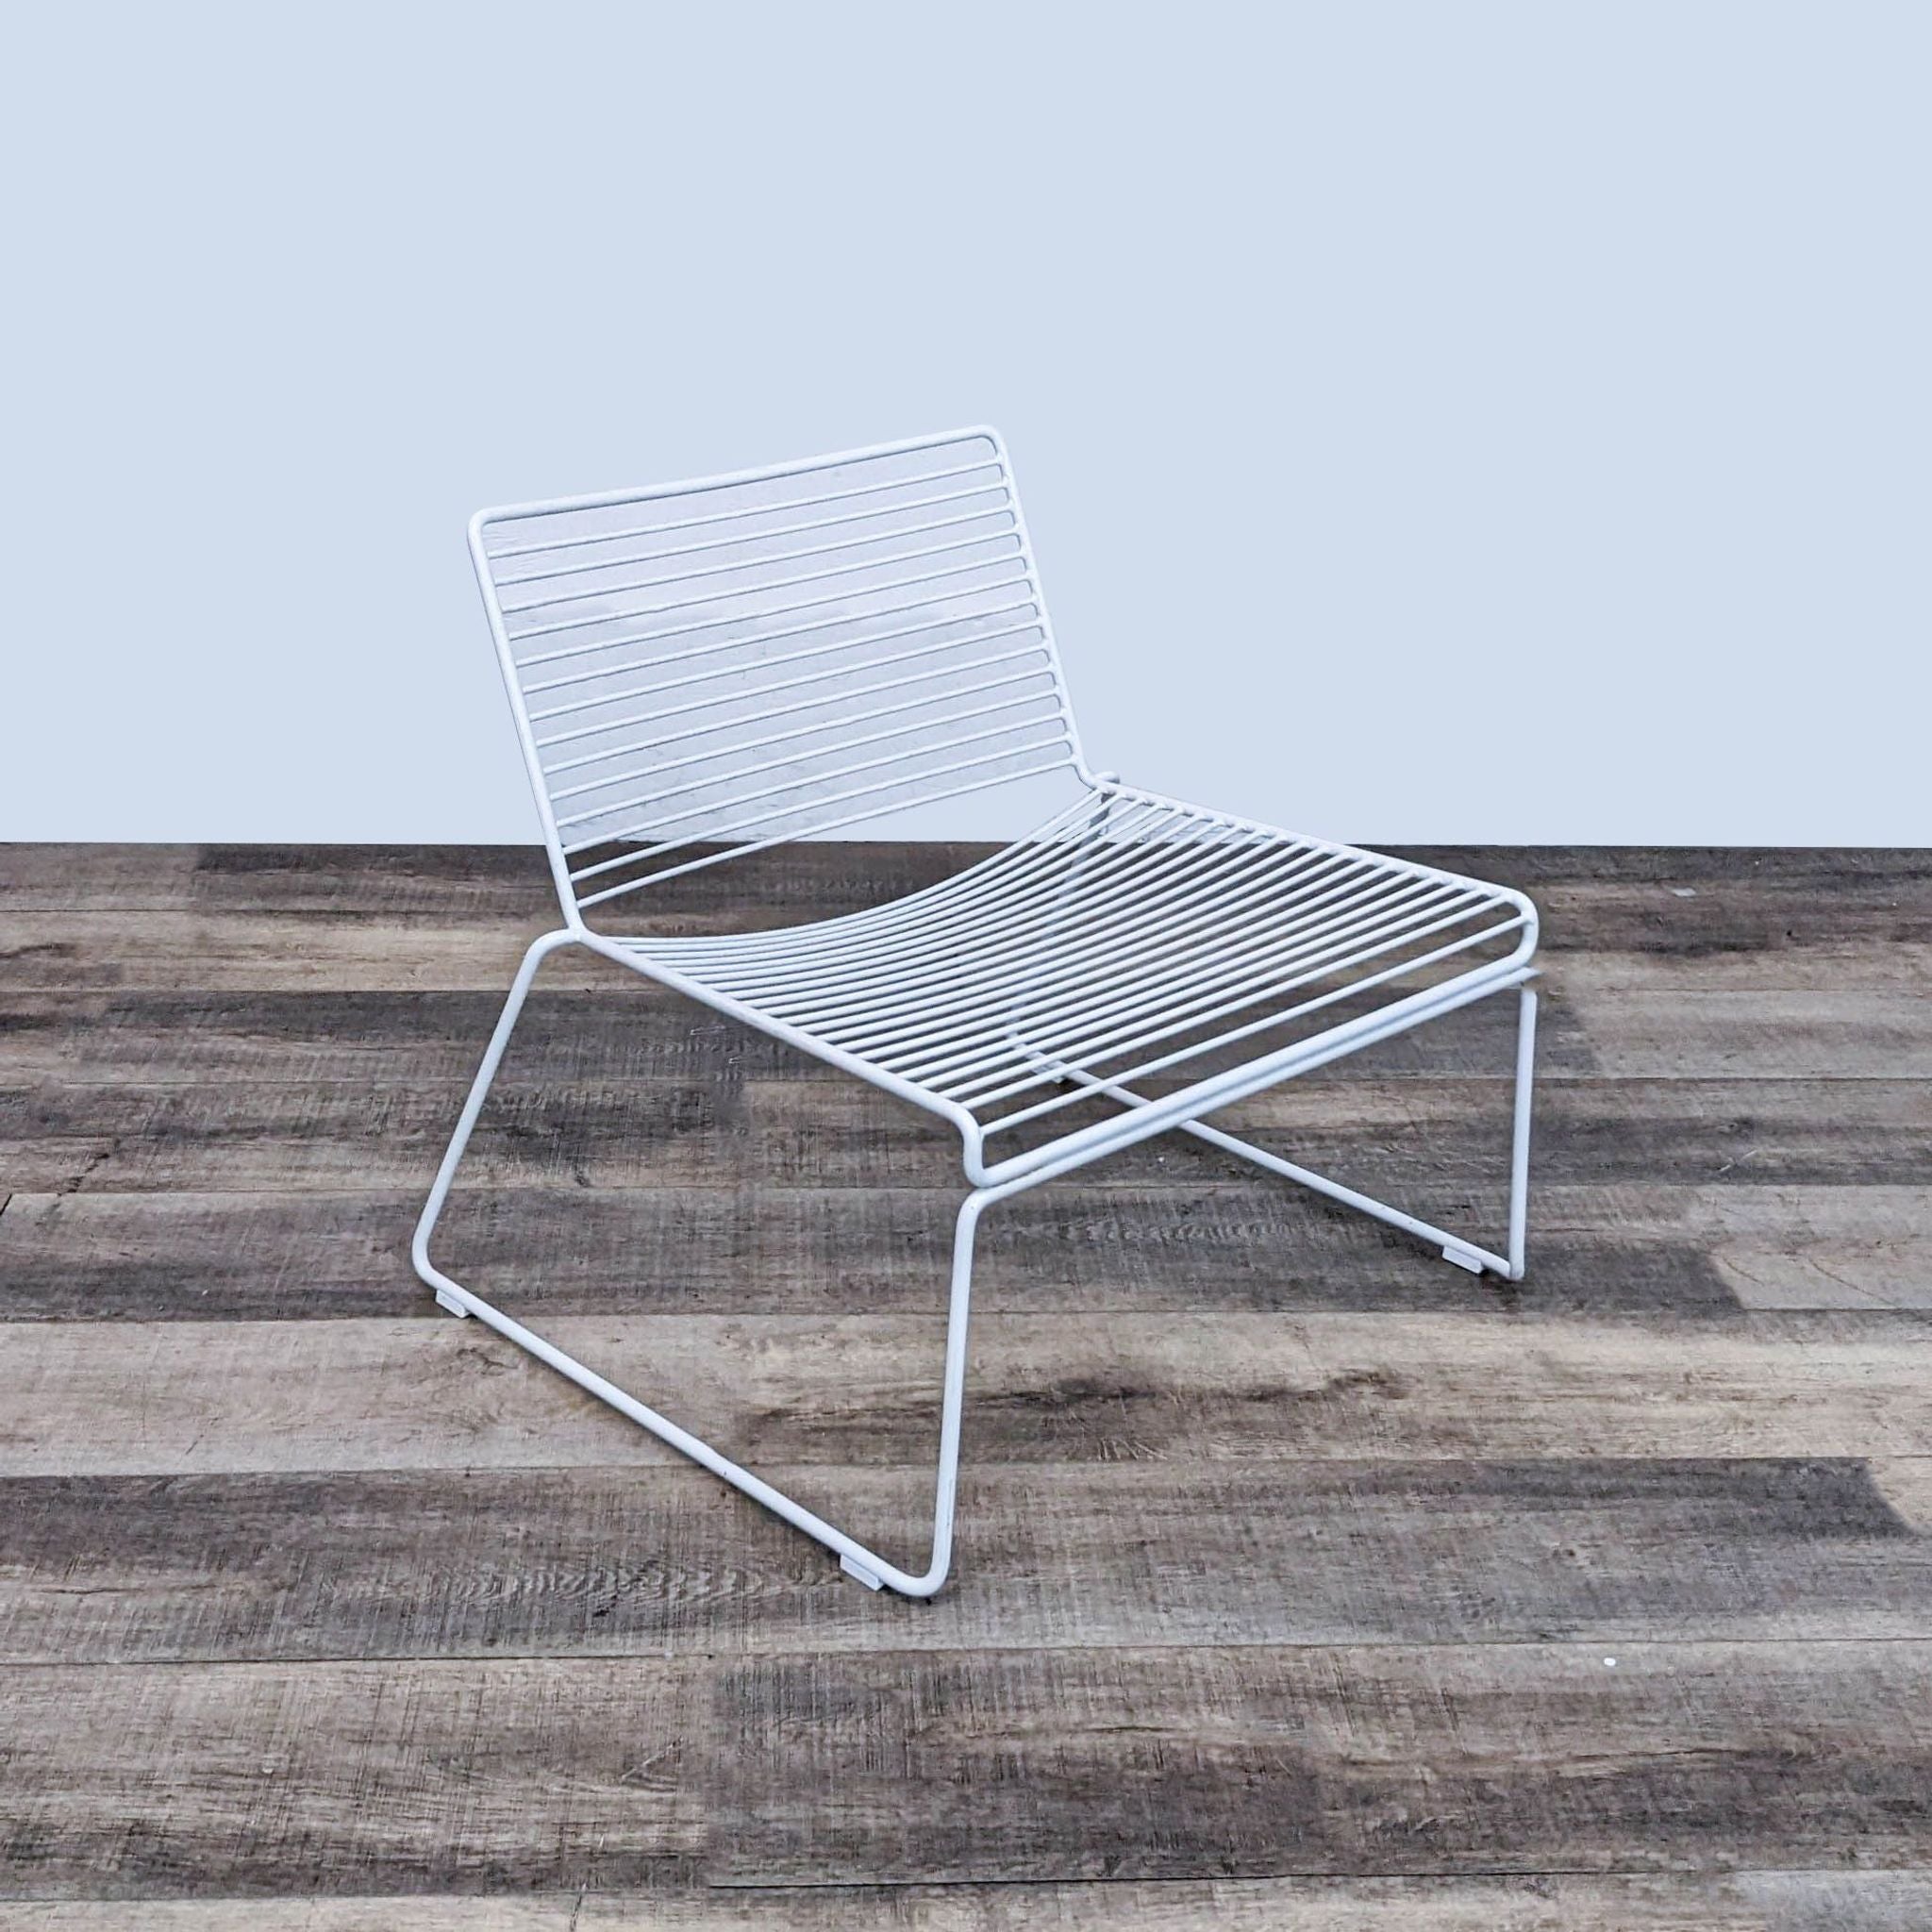 White modern Hee Chair by Design Within Reach featuring a wide seat, low height, and powder-coated steel frame on wood flooring.